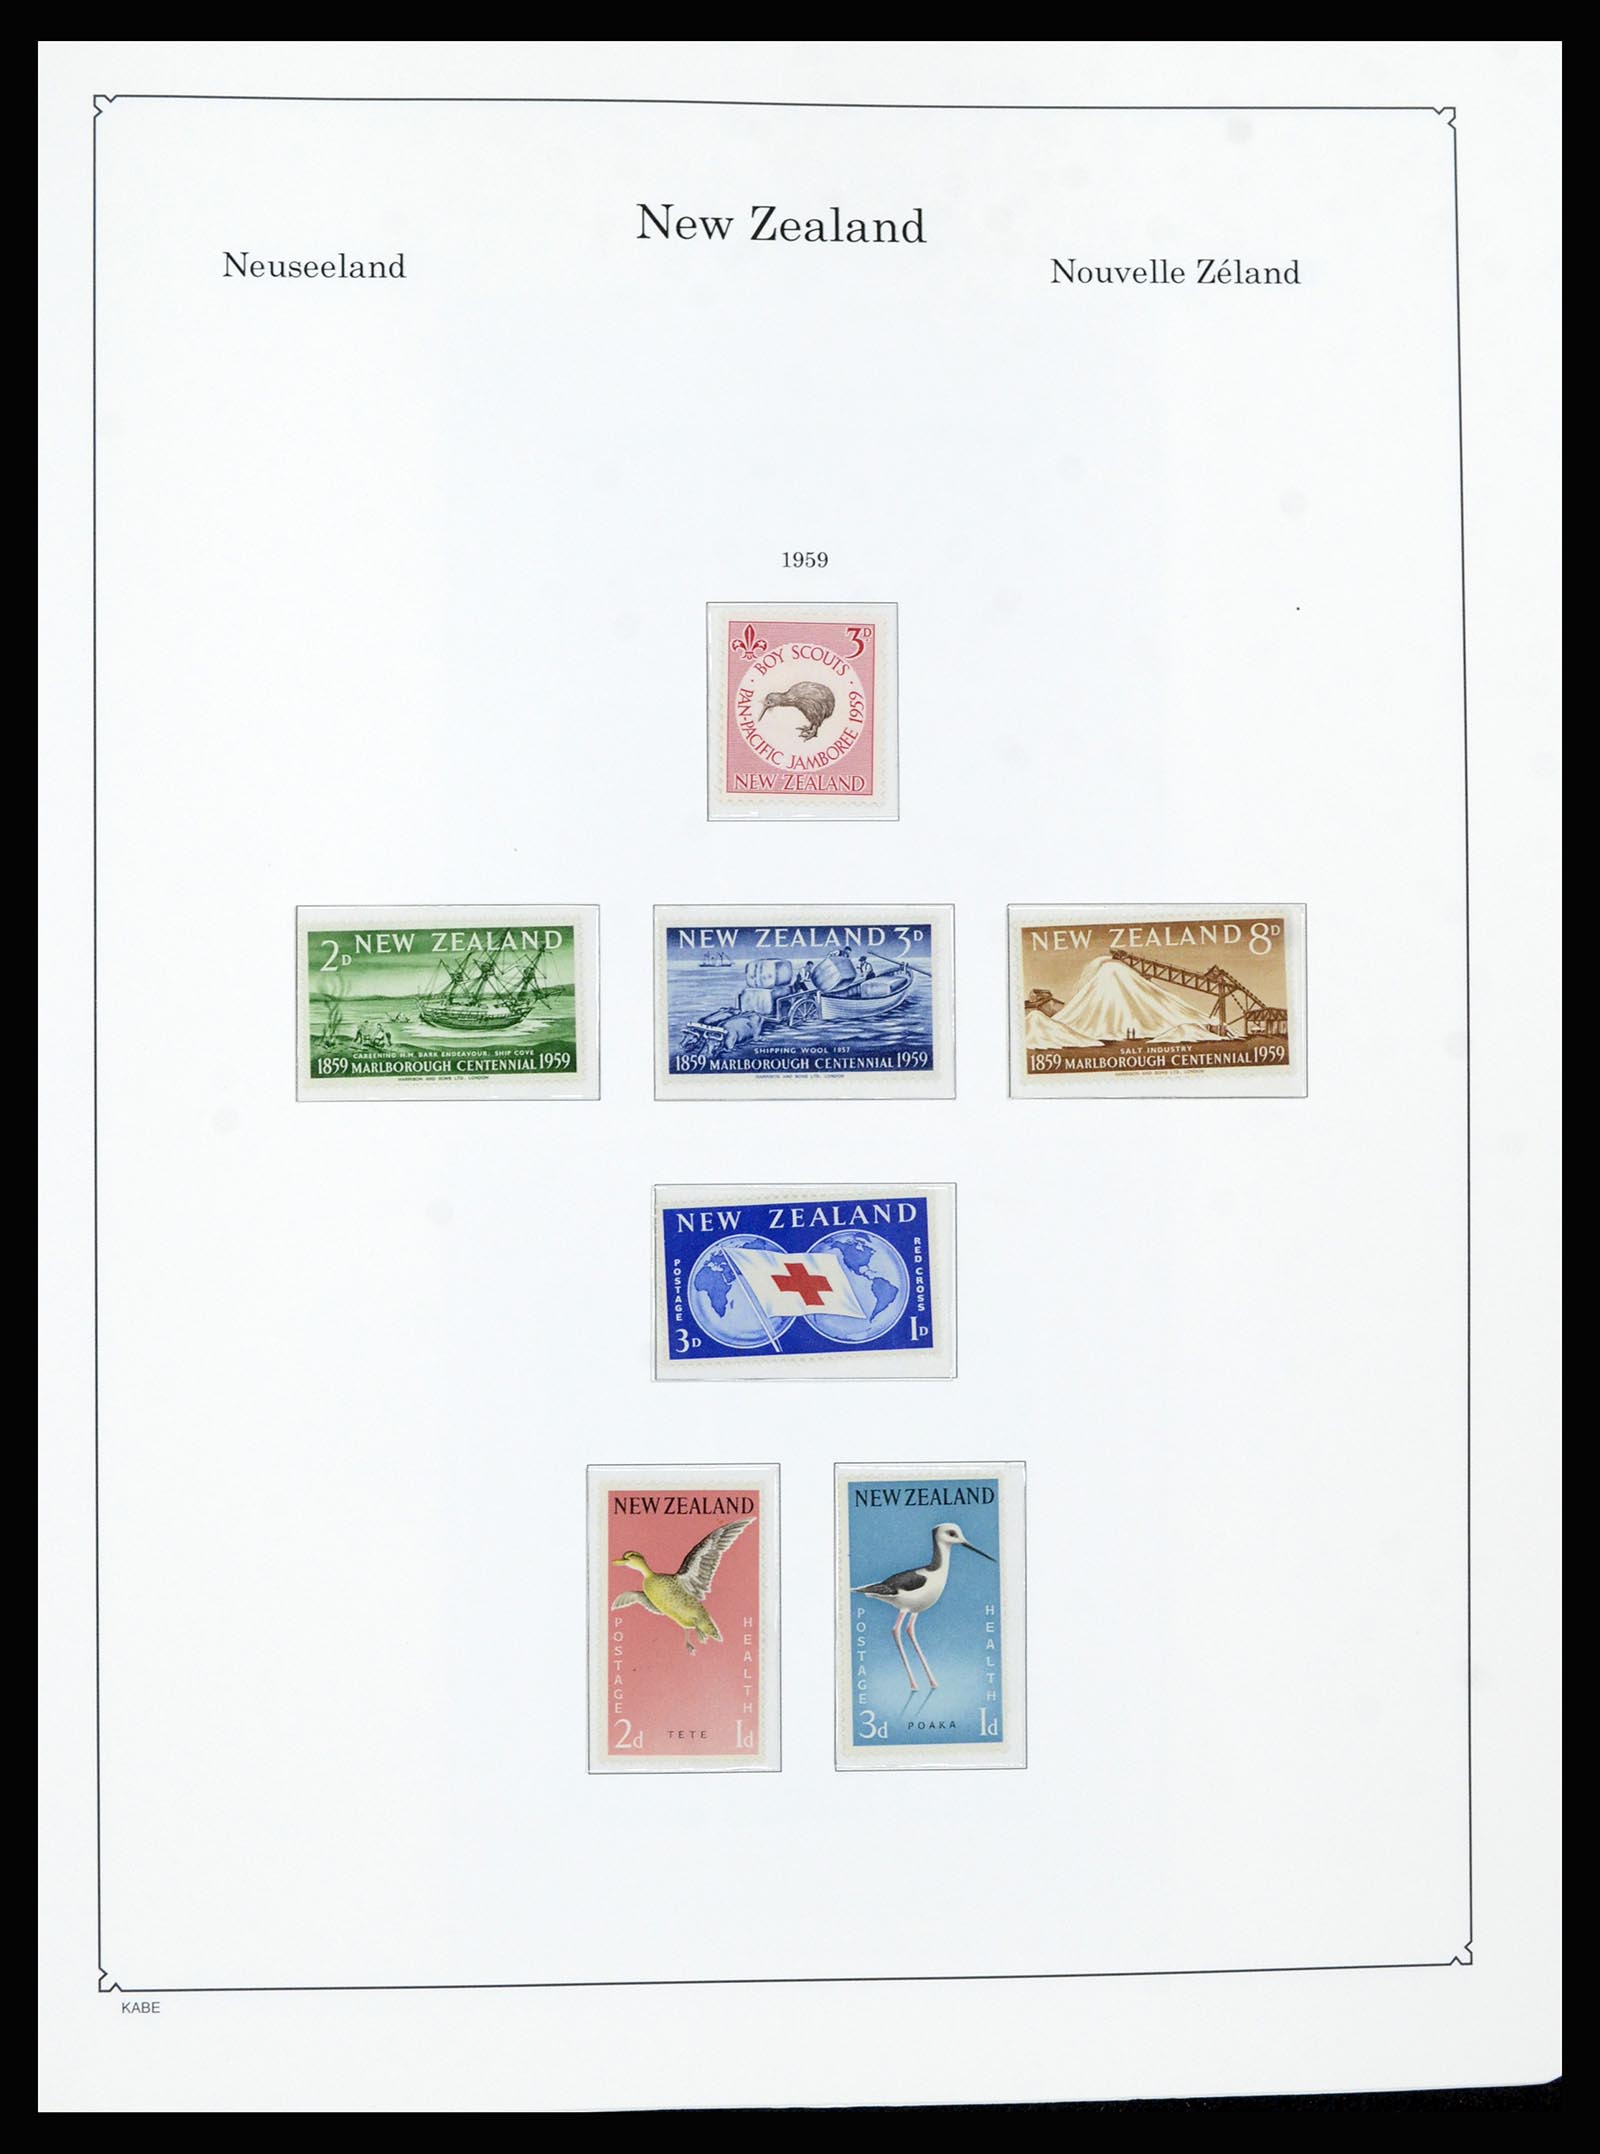 37148 033 - Stamp collection 37148 New Zealand specialised collection 1953-1995.